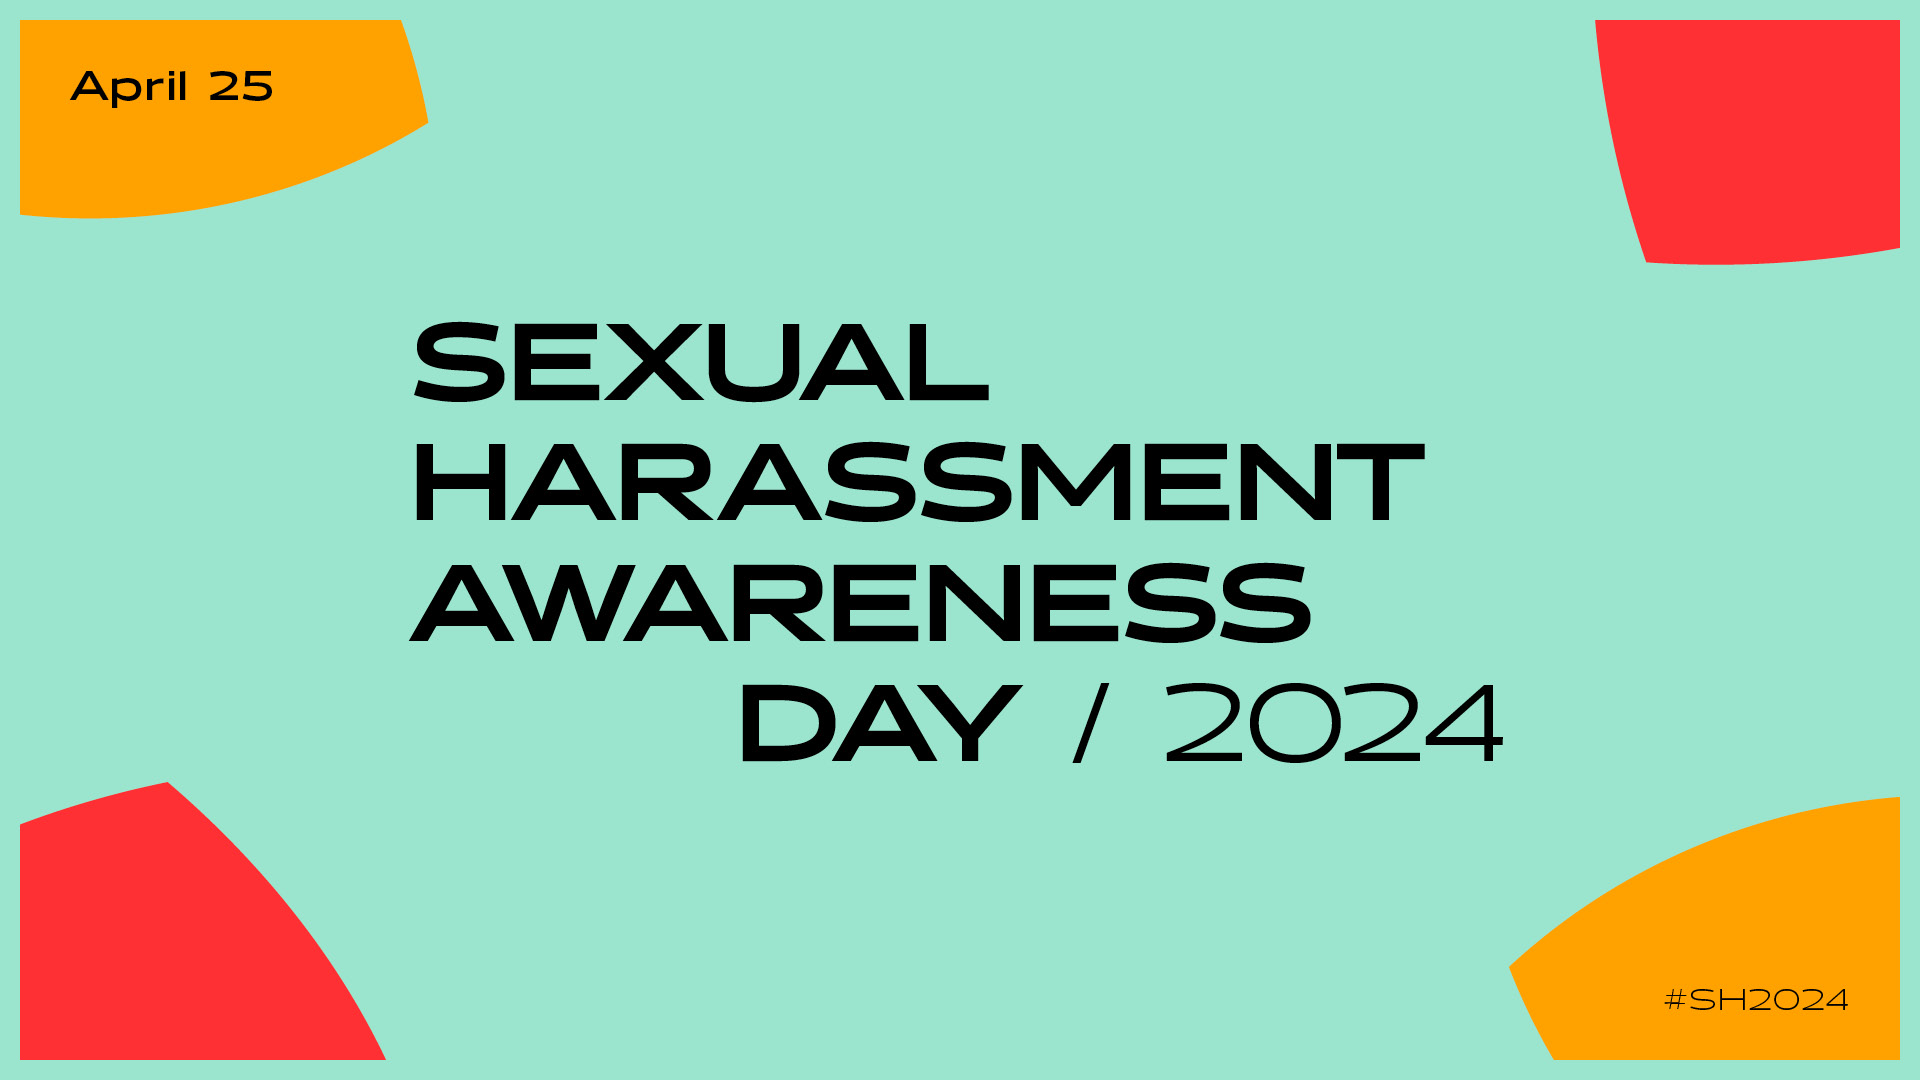 Programme of the Sexual Harassment Awareness Day 2024